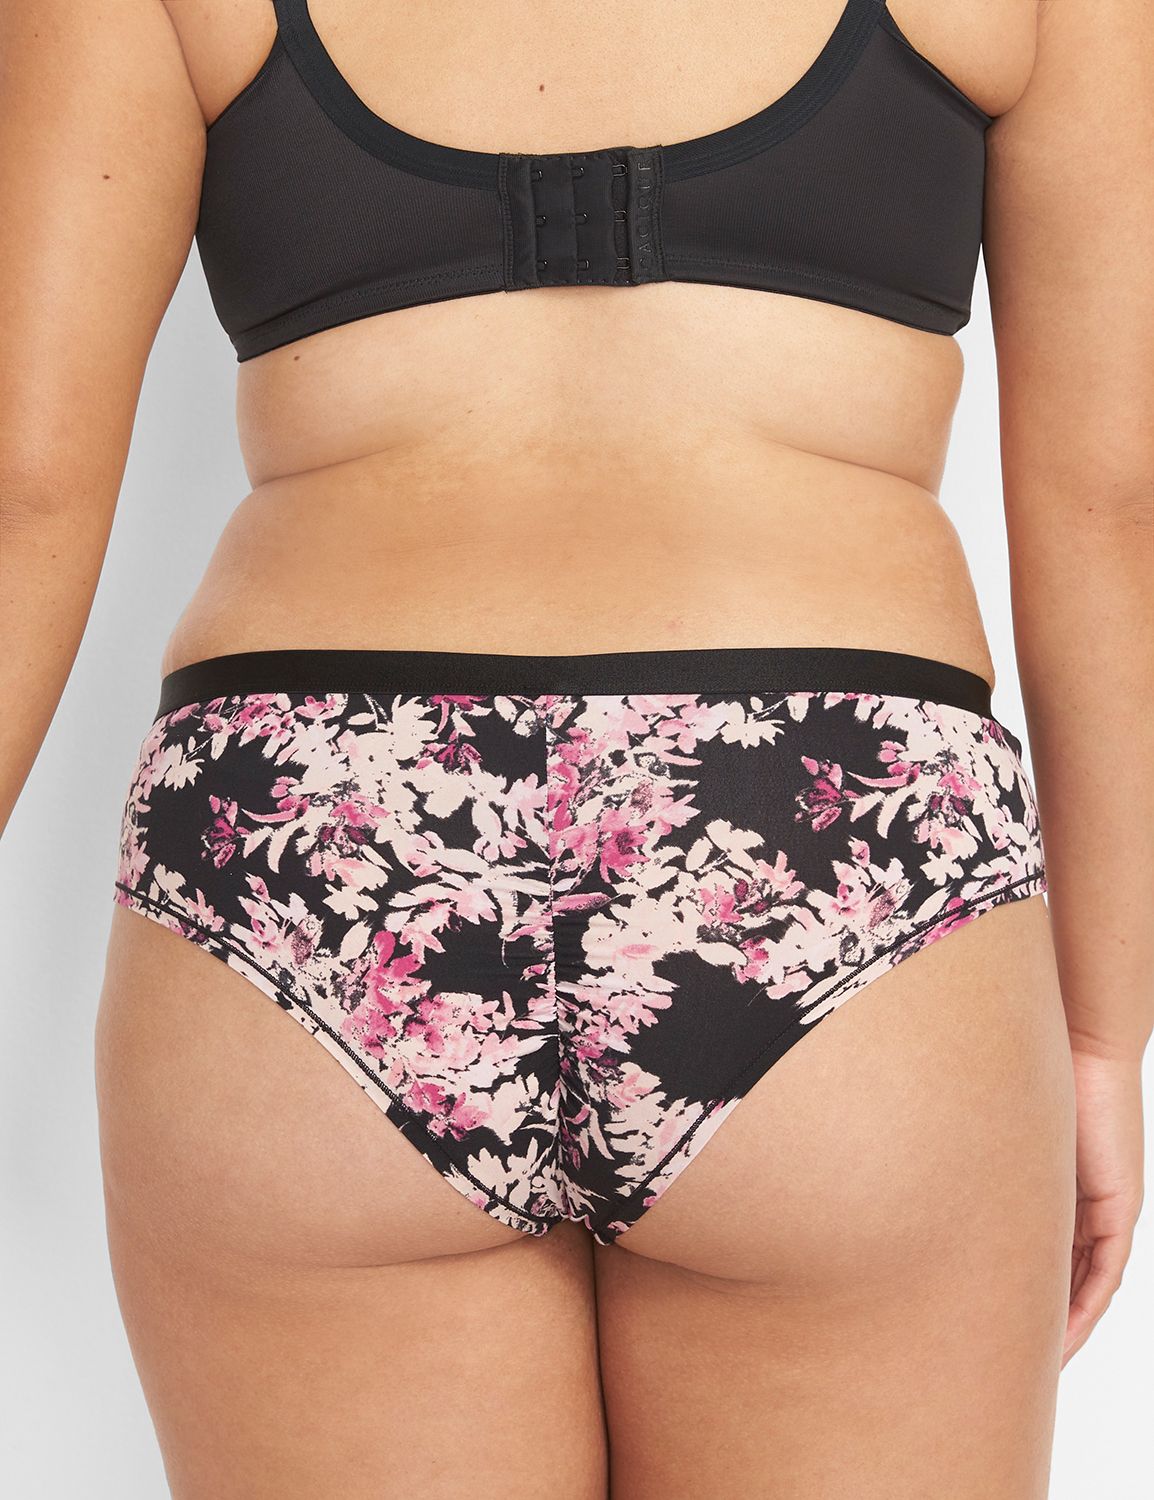 CACIQUE Extra Soft Cheeky Panties PLUS 22/24 PINK FLORAL Lane